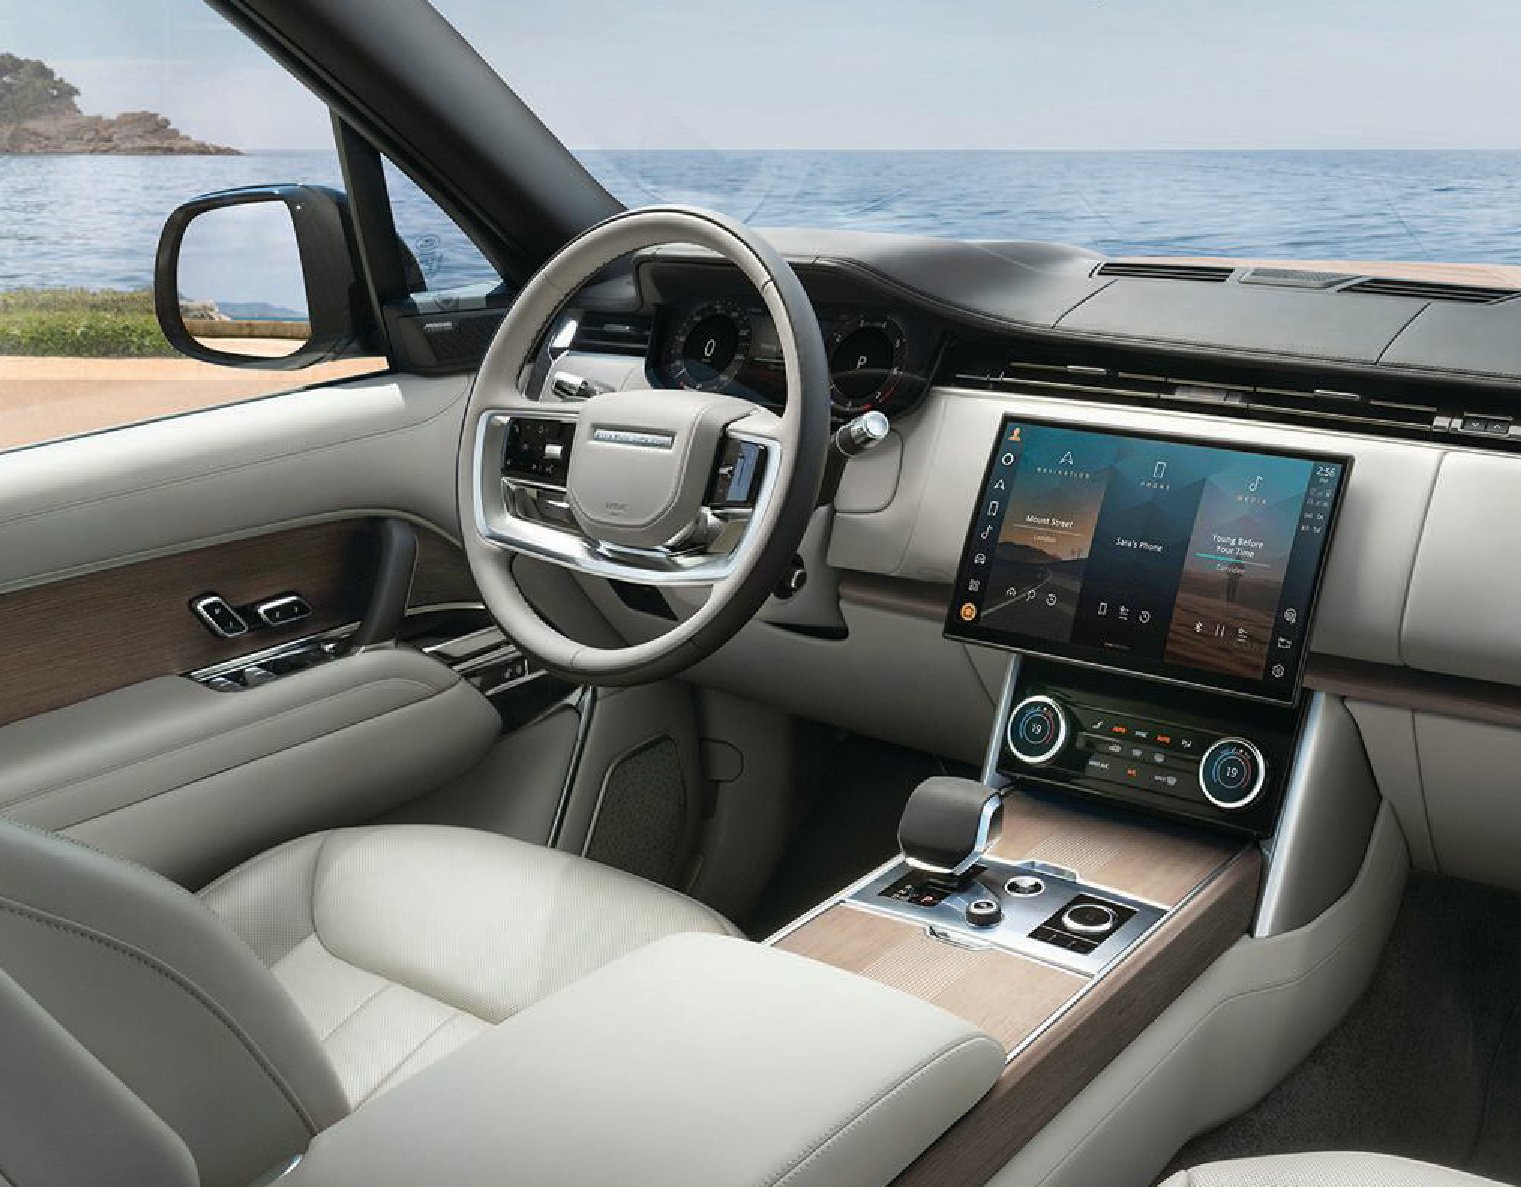 Range Rover’s signature command seating position gives you a clear view of the road ahead. PHOTO COURTESY OF BRAND